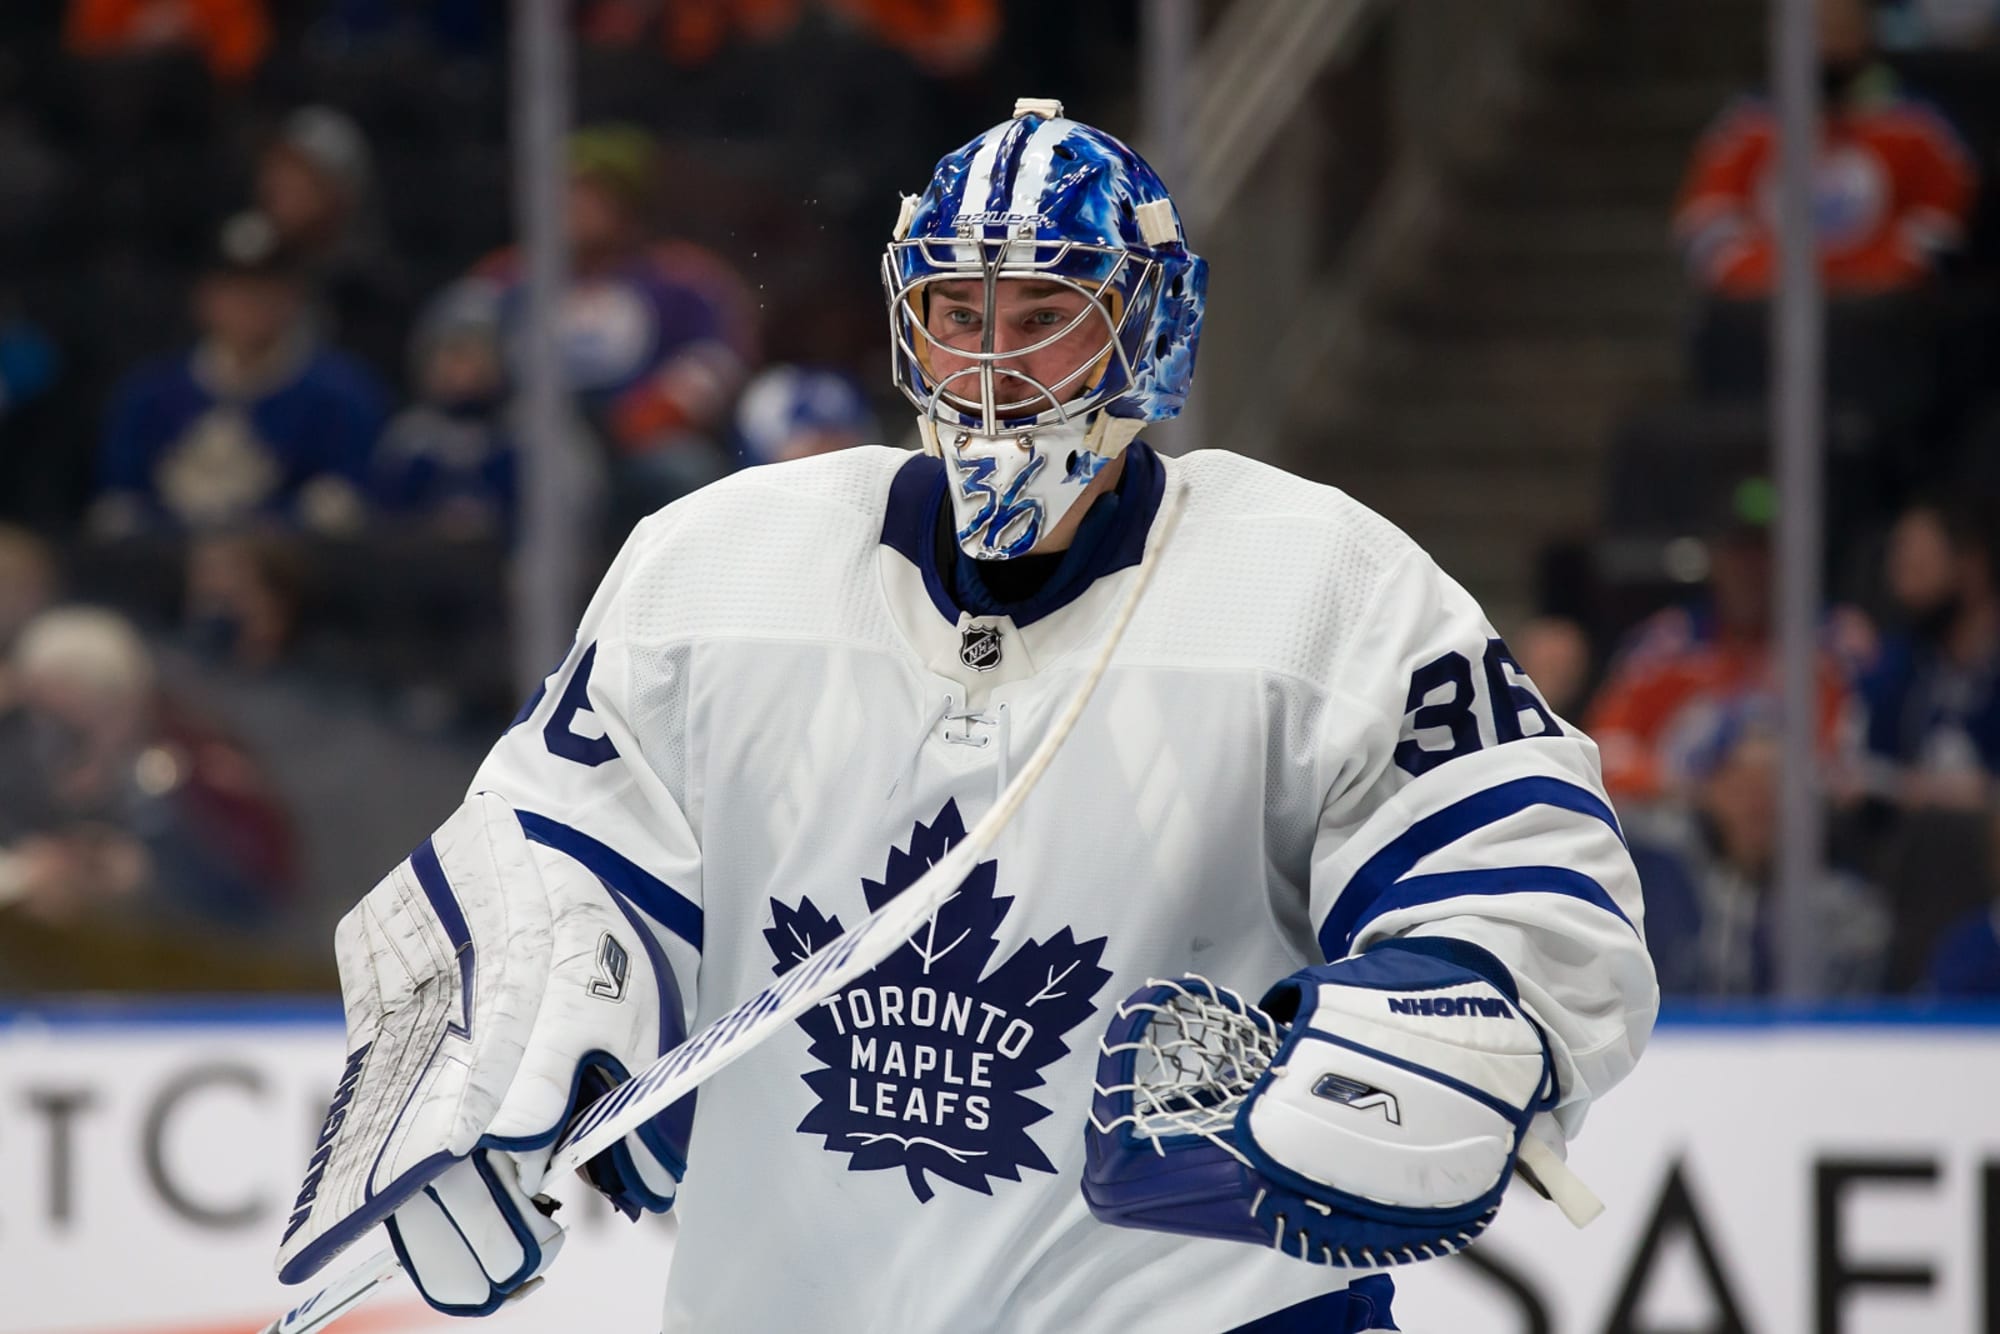 Toronto Maple Leafs Without Jack Campbell for 2 Weeks